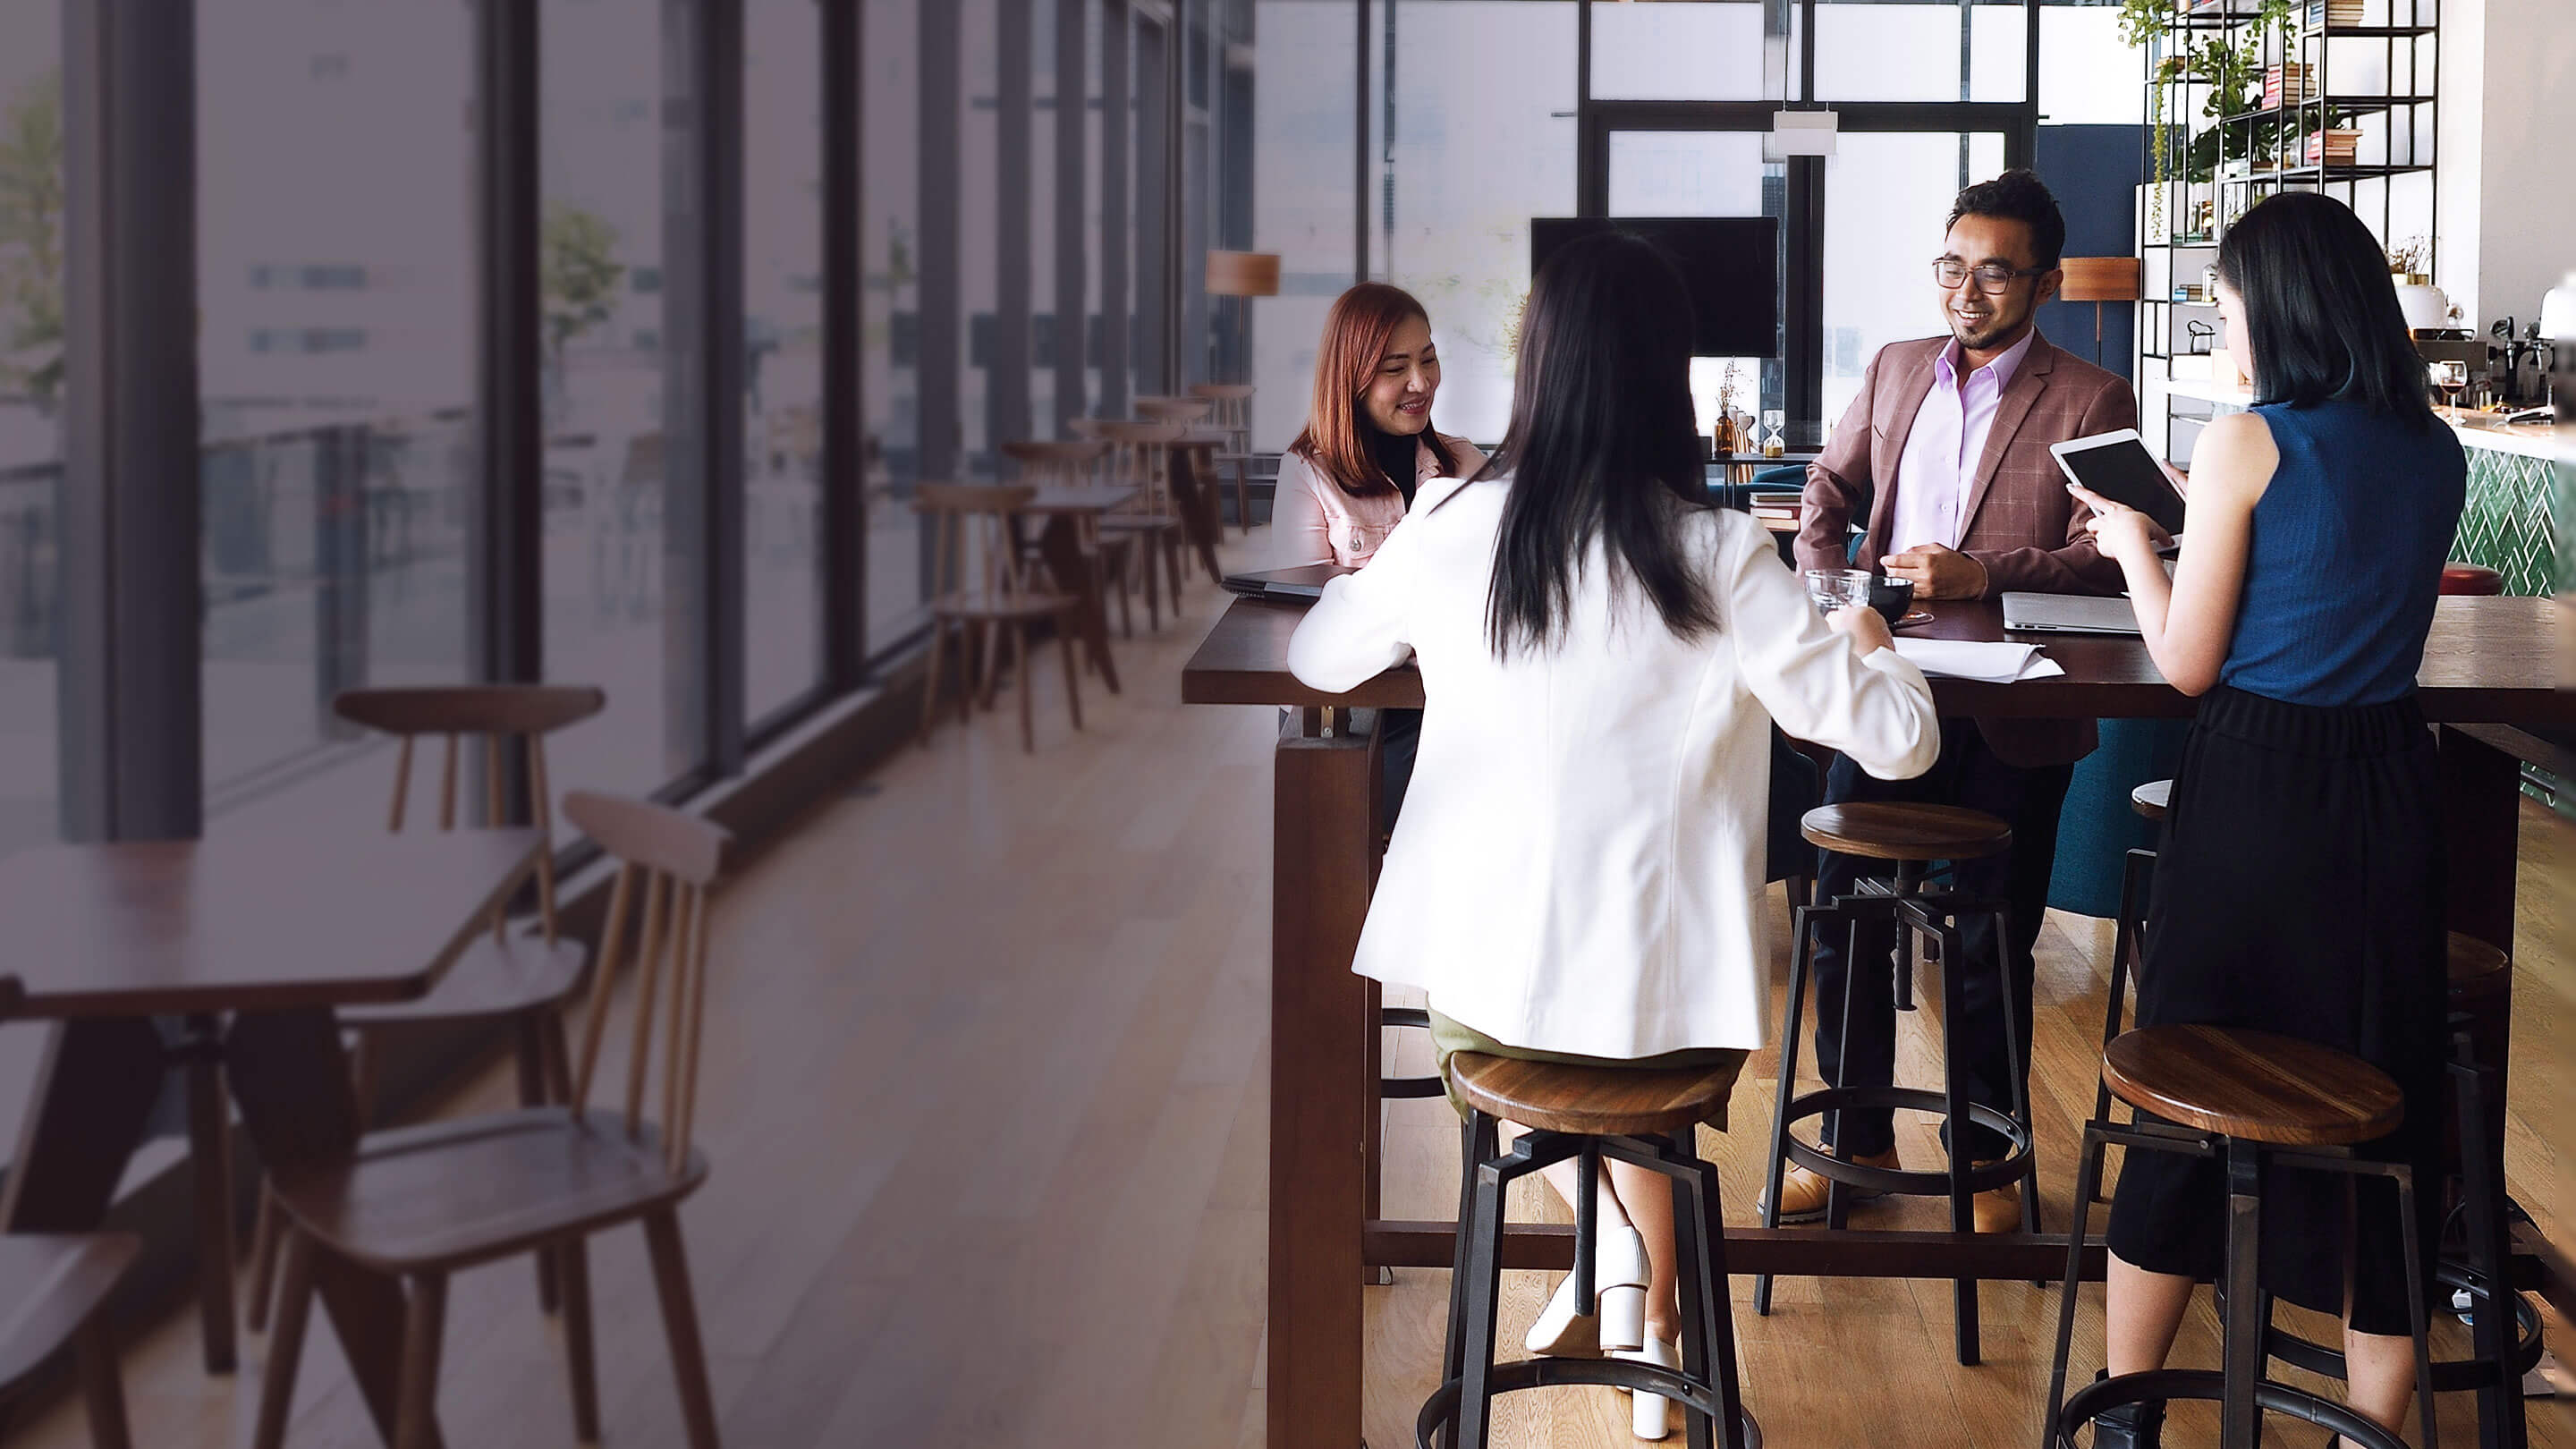 Employees having an informal meeting in a cafe setting